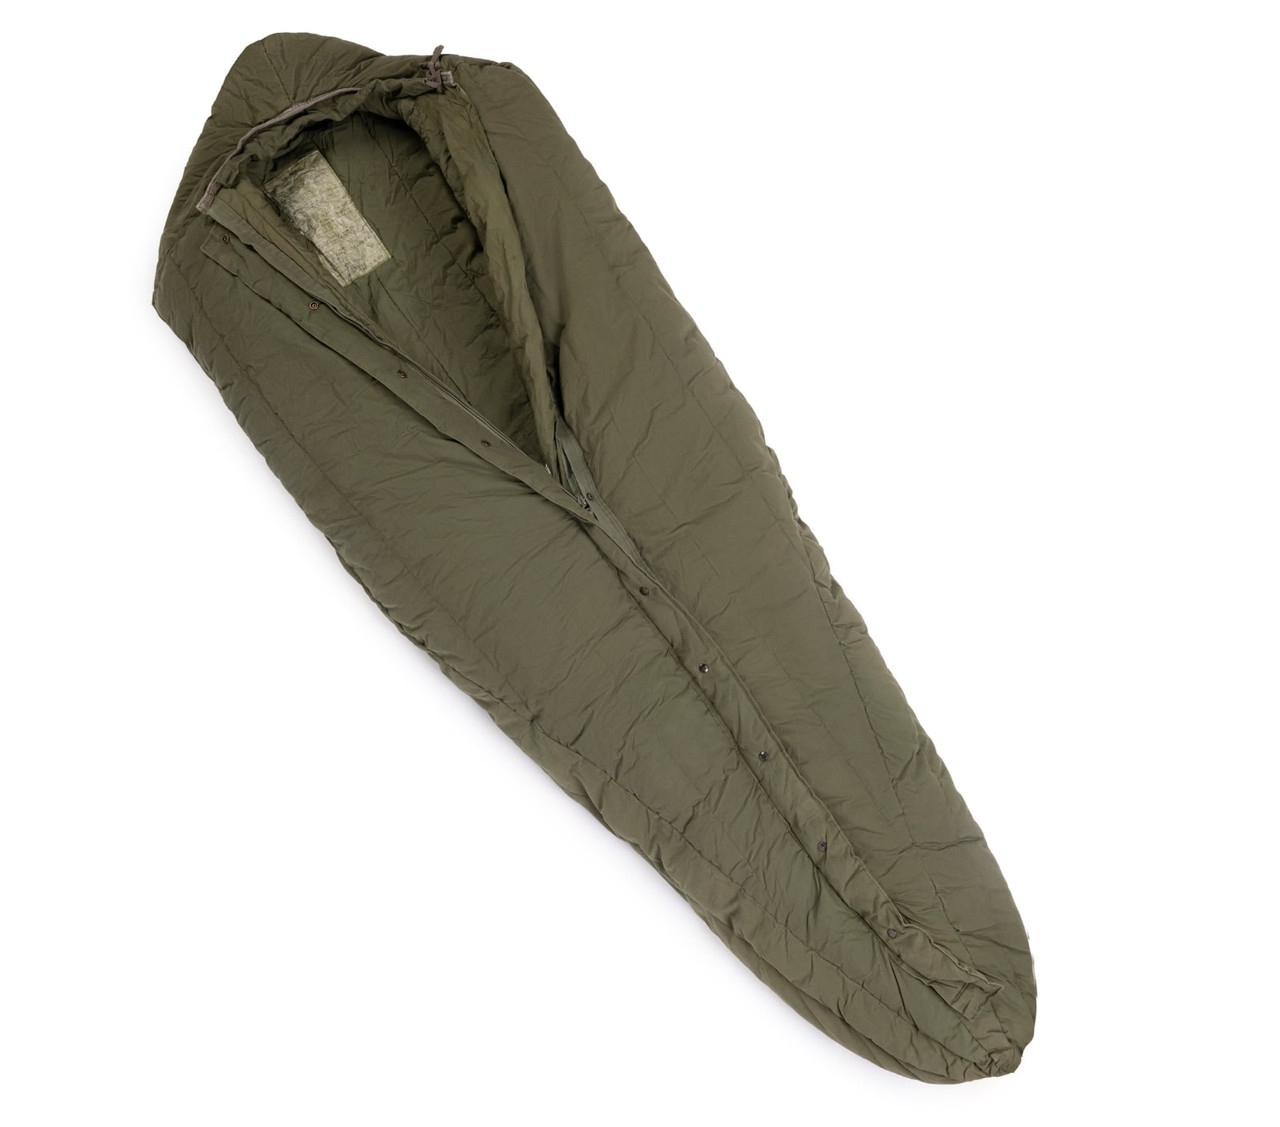 U.S. Military issue Extreme Cold Weather down Sleeping Bag